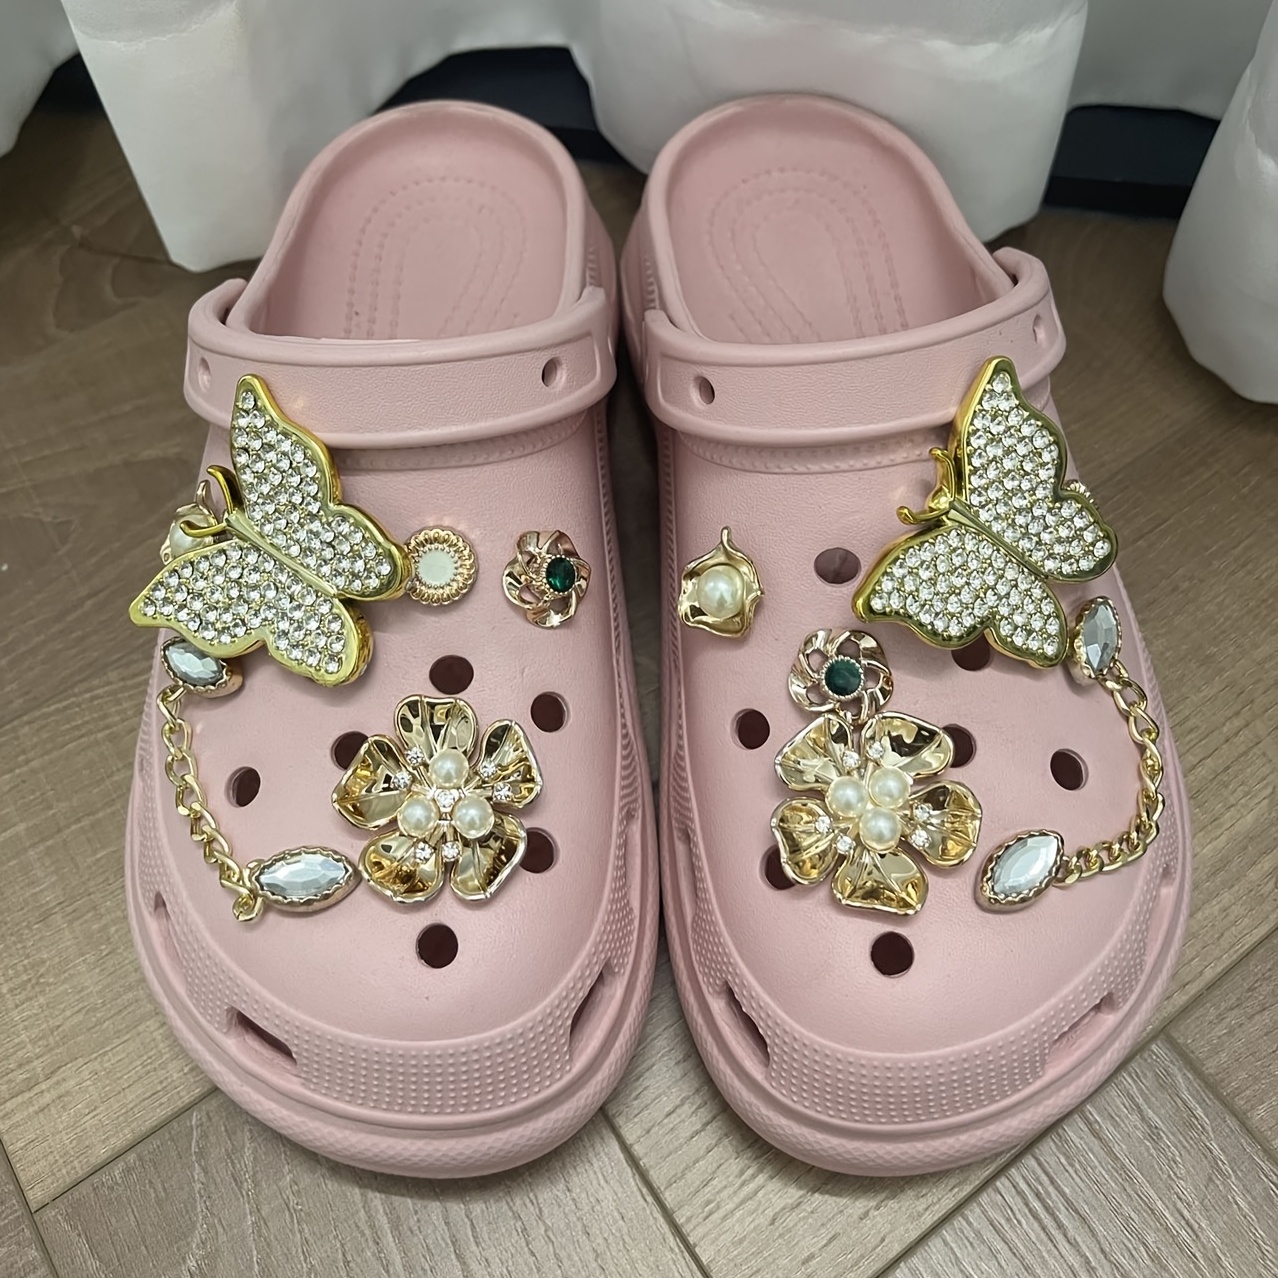 Bling Shoes Charms for Croc Shoes Decoration/Diamond Charms for Girls and  Women/Luxury Sandal Charms with Luxury Clog Accessories/Women Girls Party